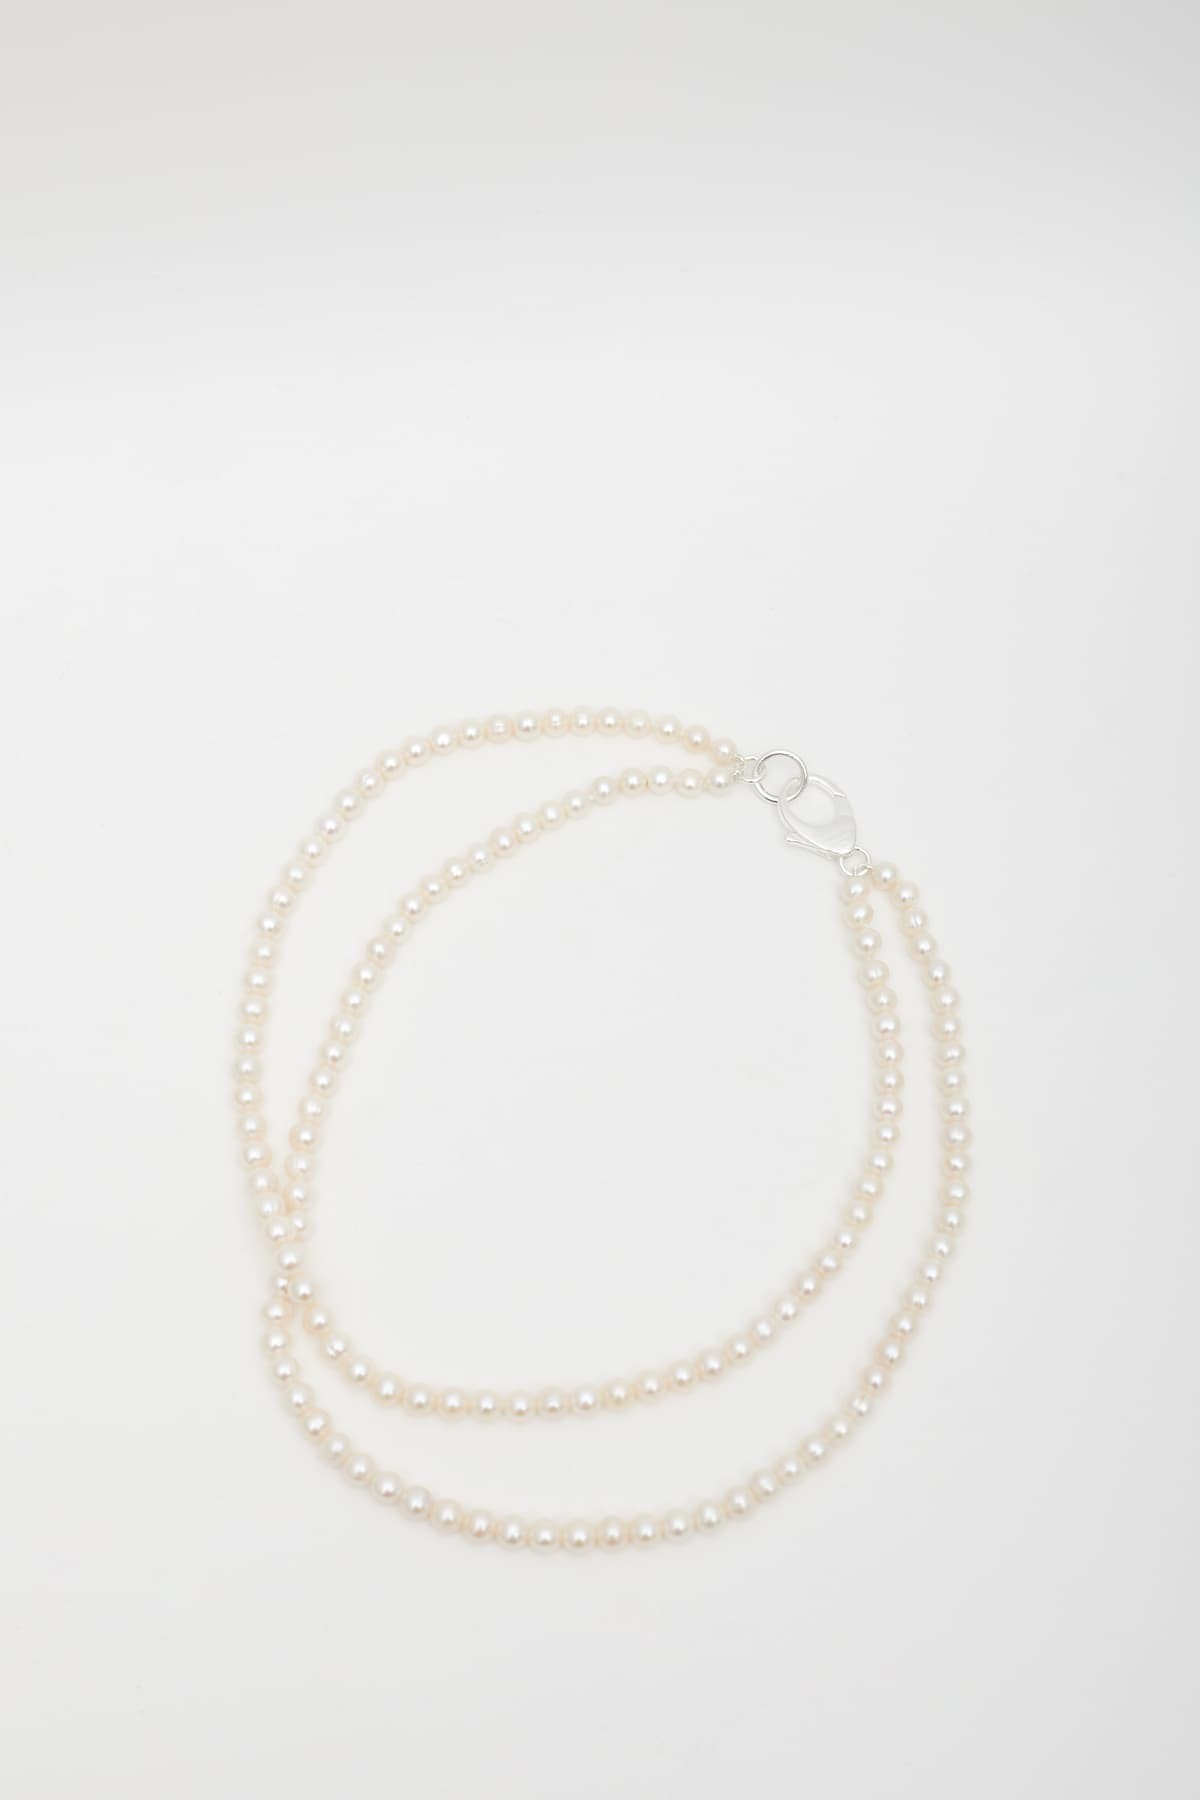 HATTON LABS STERLING SILVER DOUBLE PEARL CHAIN IAMNUE